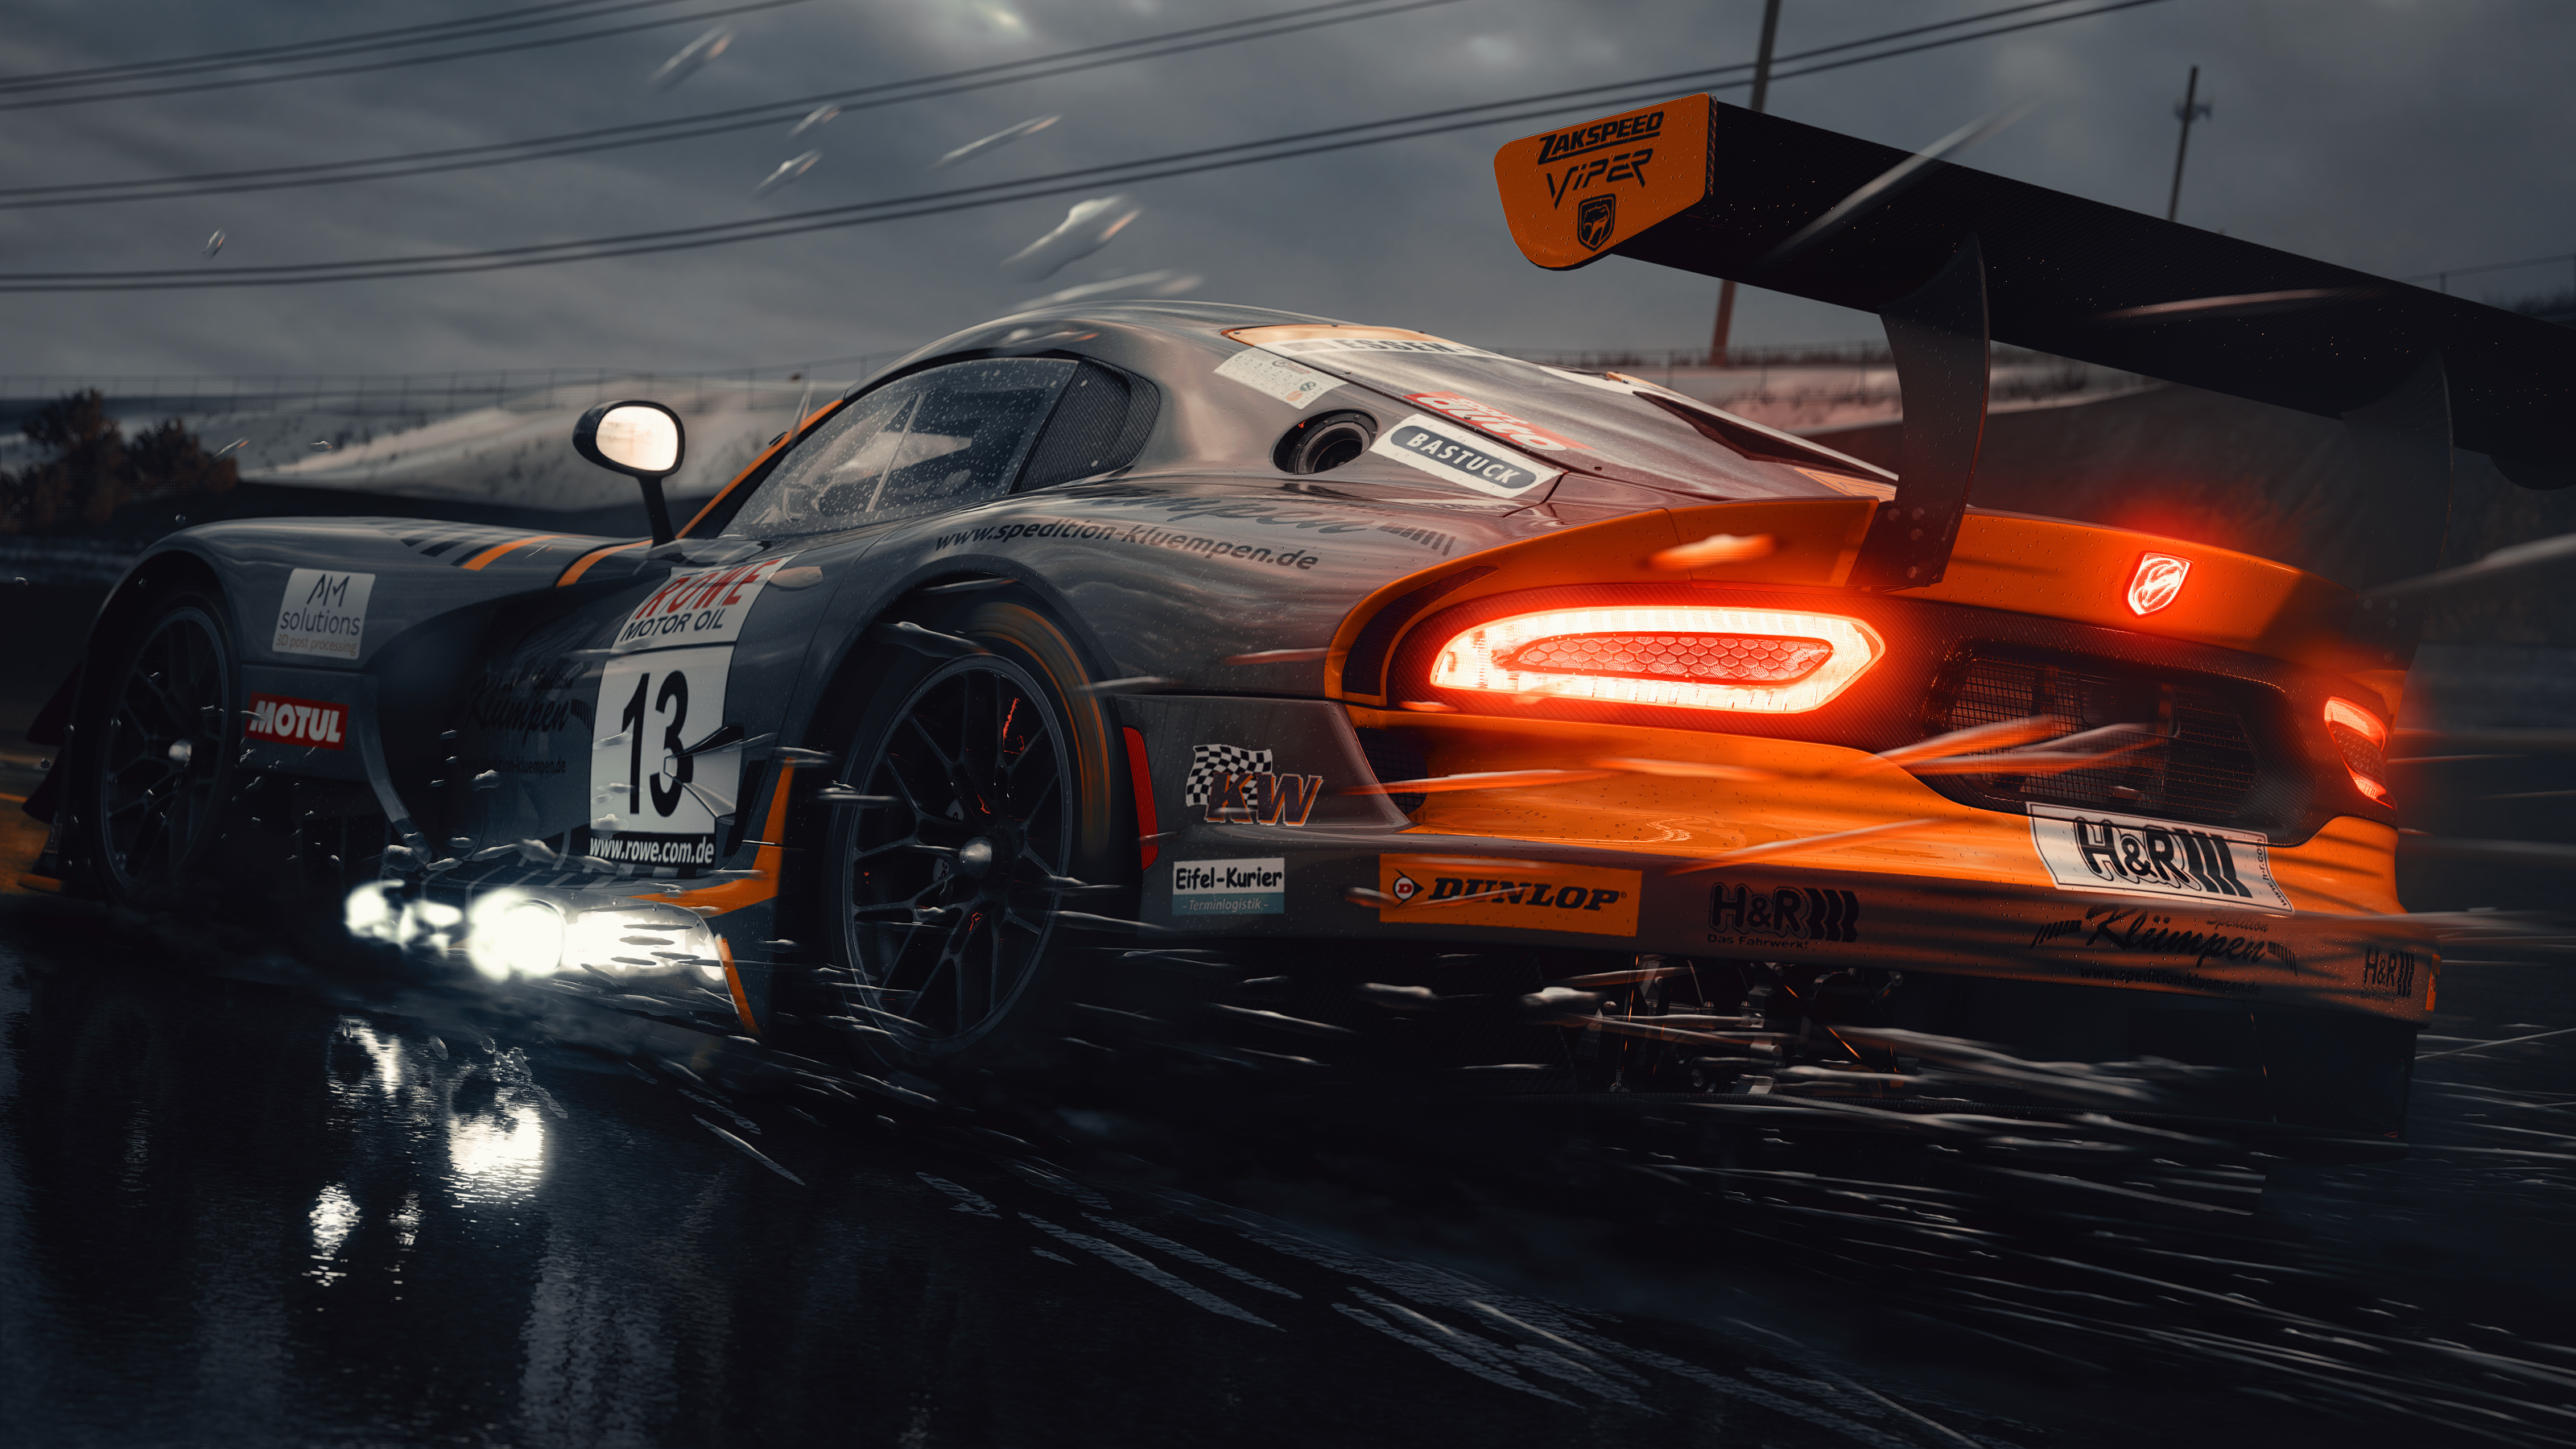 General 3200x1800 Assetto Corsa Assetto Corsa Competizione car Dodge Dodge Viper GT thunder storm PC gaming vehicle rear view licence plates sky clouds water video games digital art Laguna Seca